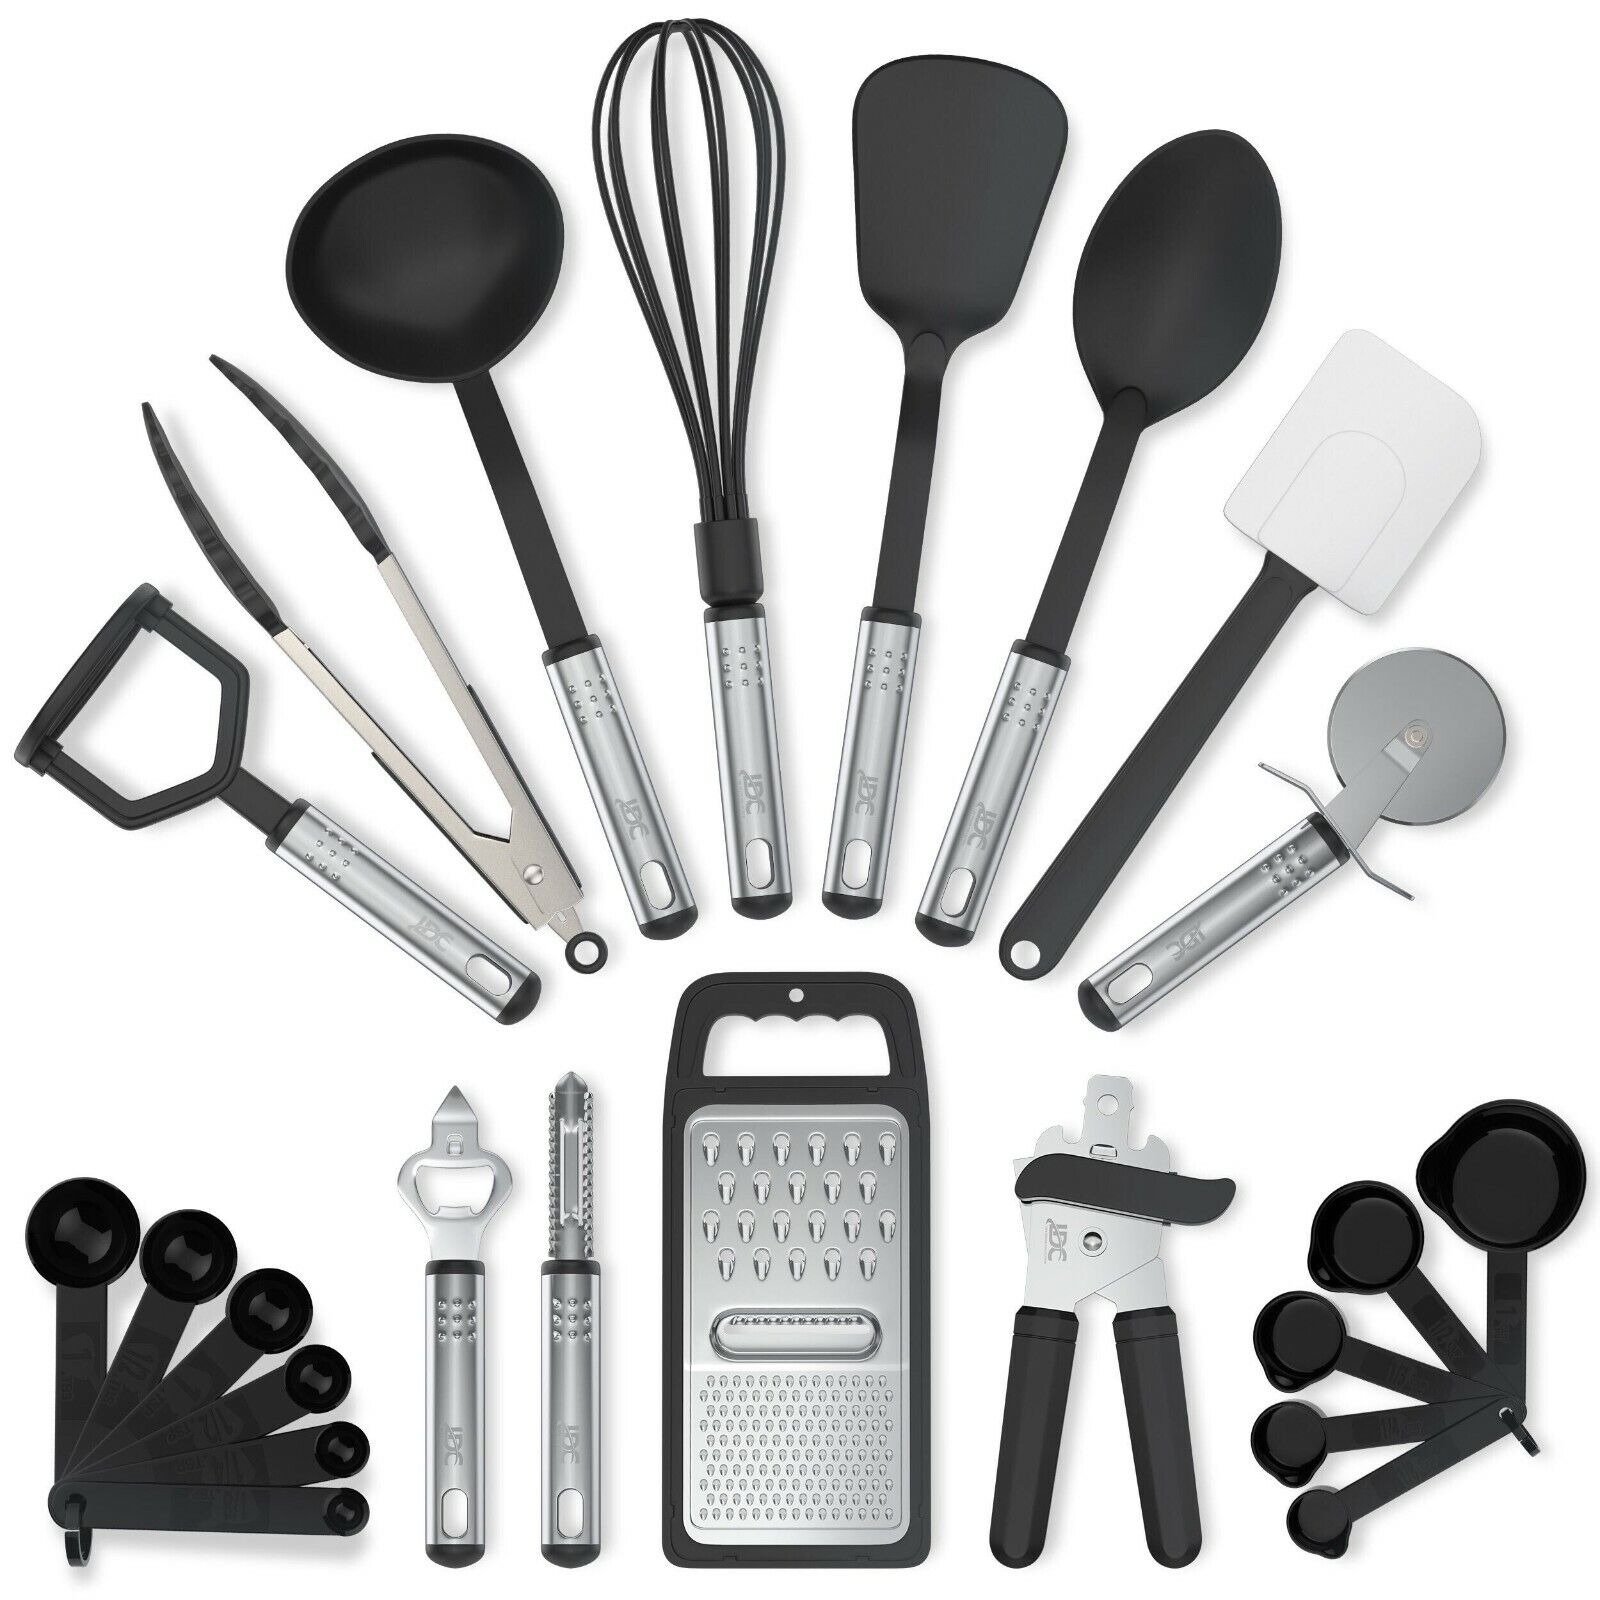 Set Nylon Stainless Steel 23 Piece Heat Resistant Cooking To